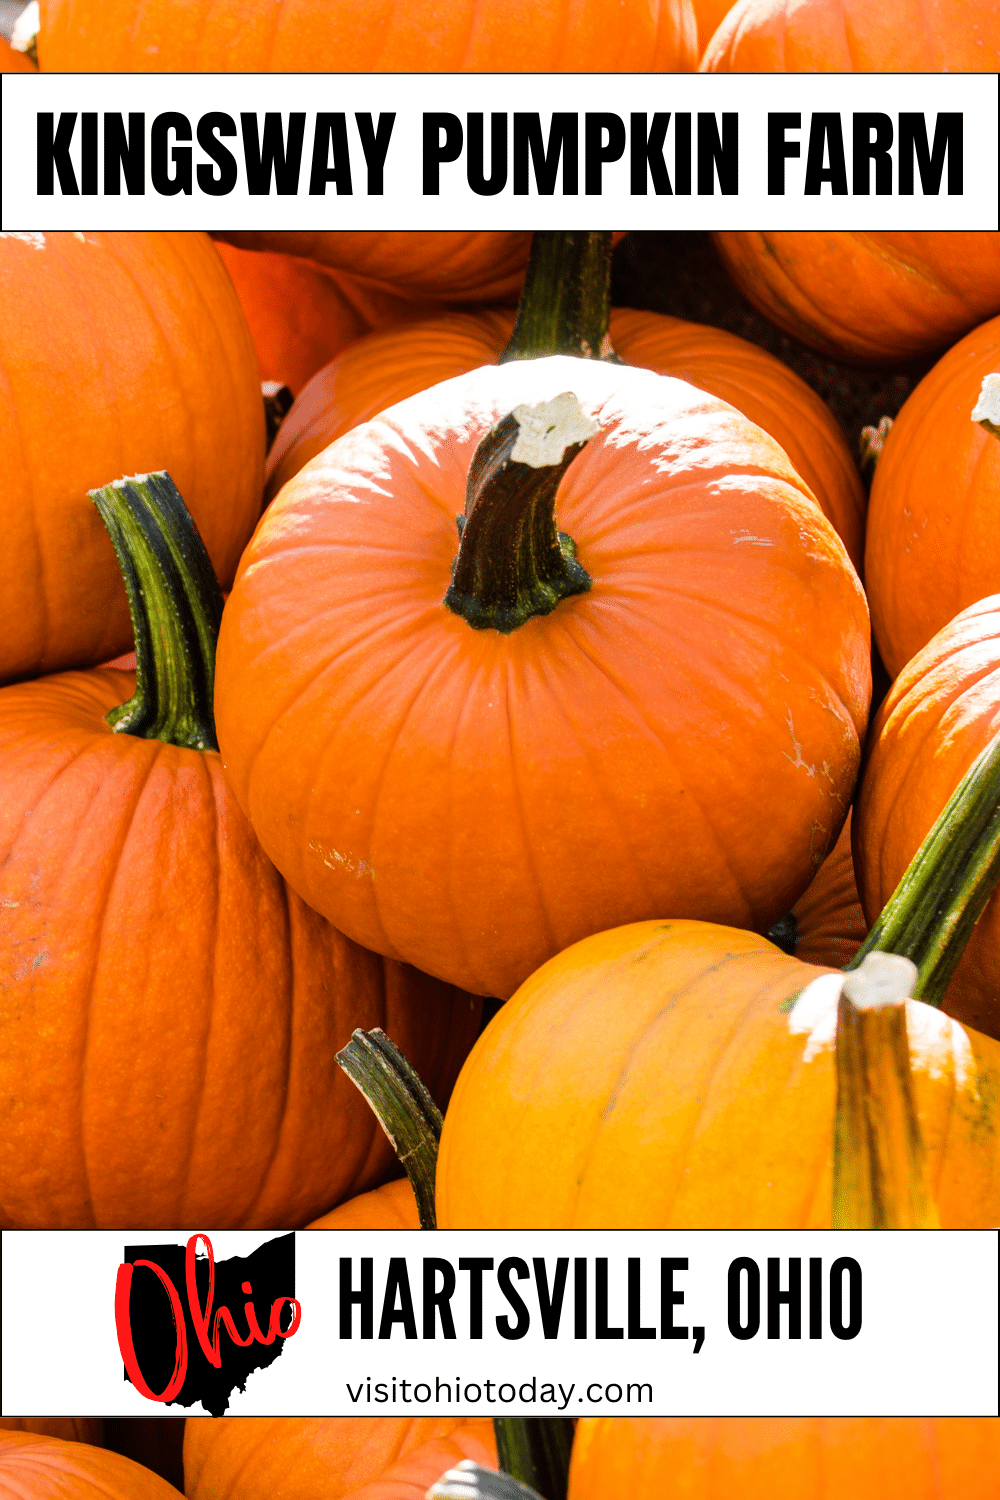 Kingsway Pumpkin Farm is a popular pumpkin patch in Ohio. Kingsway Pumpkin Farm offers up family oriented activities free from the dark side of Halloween. 